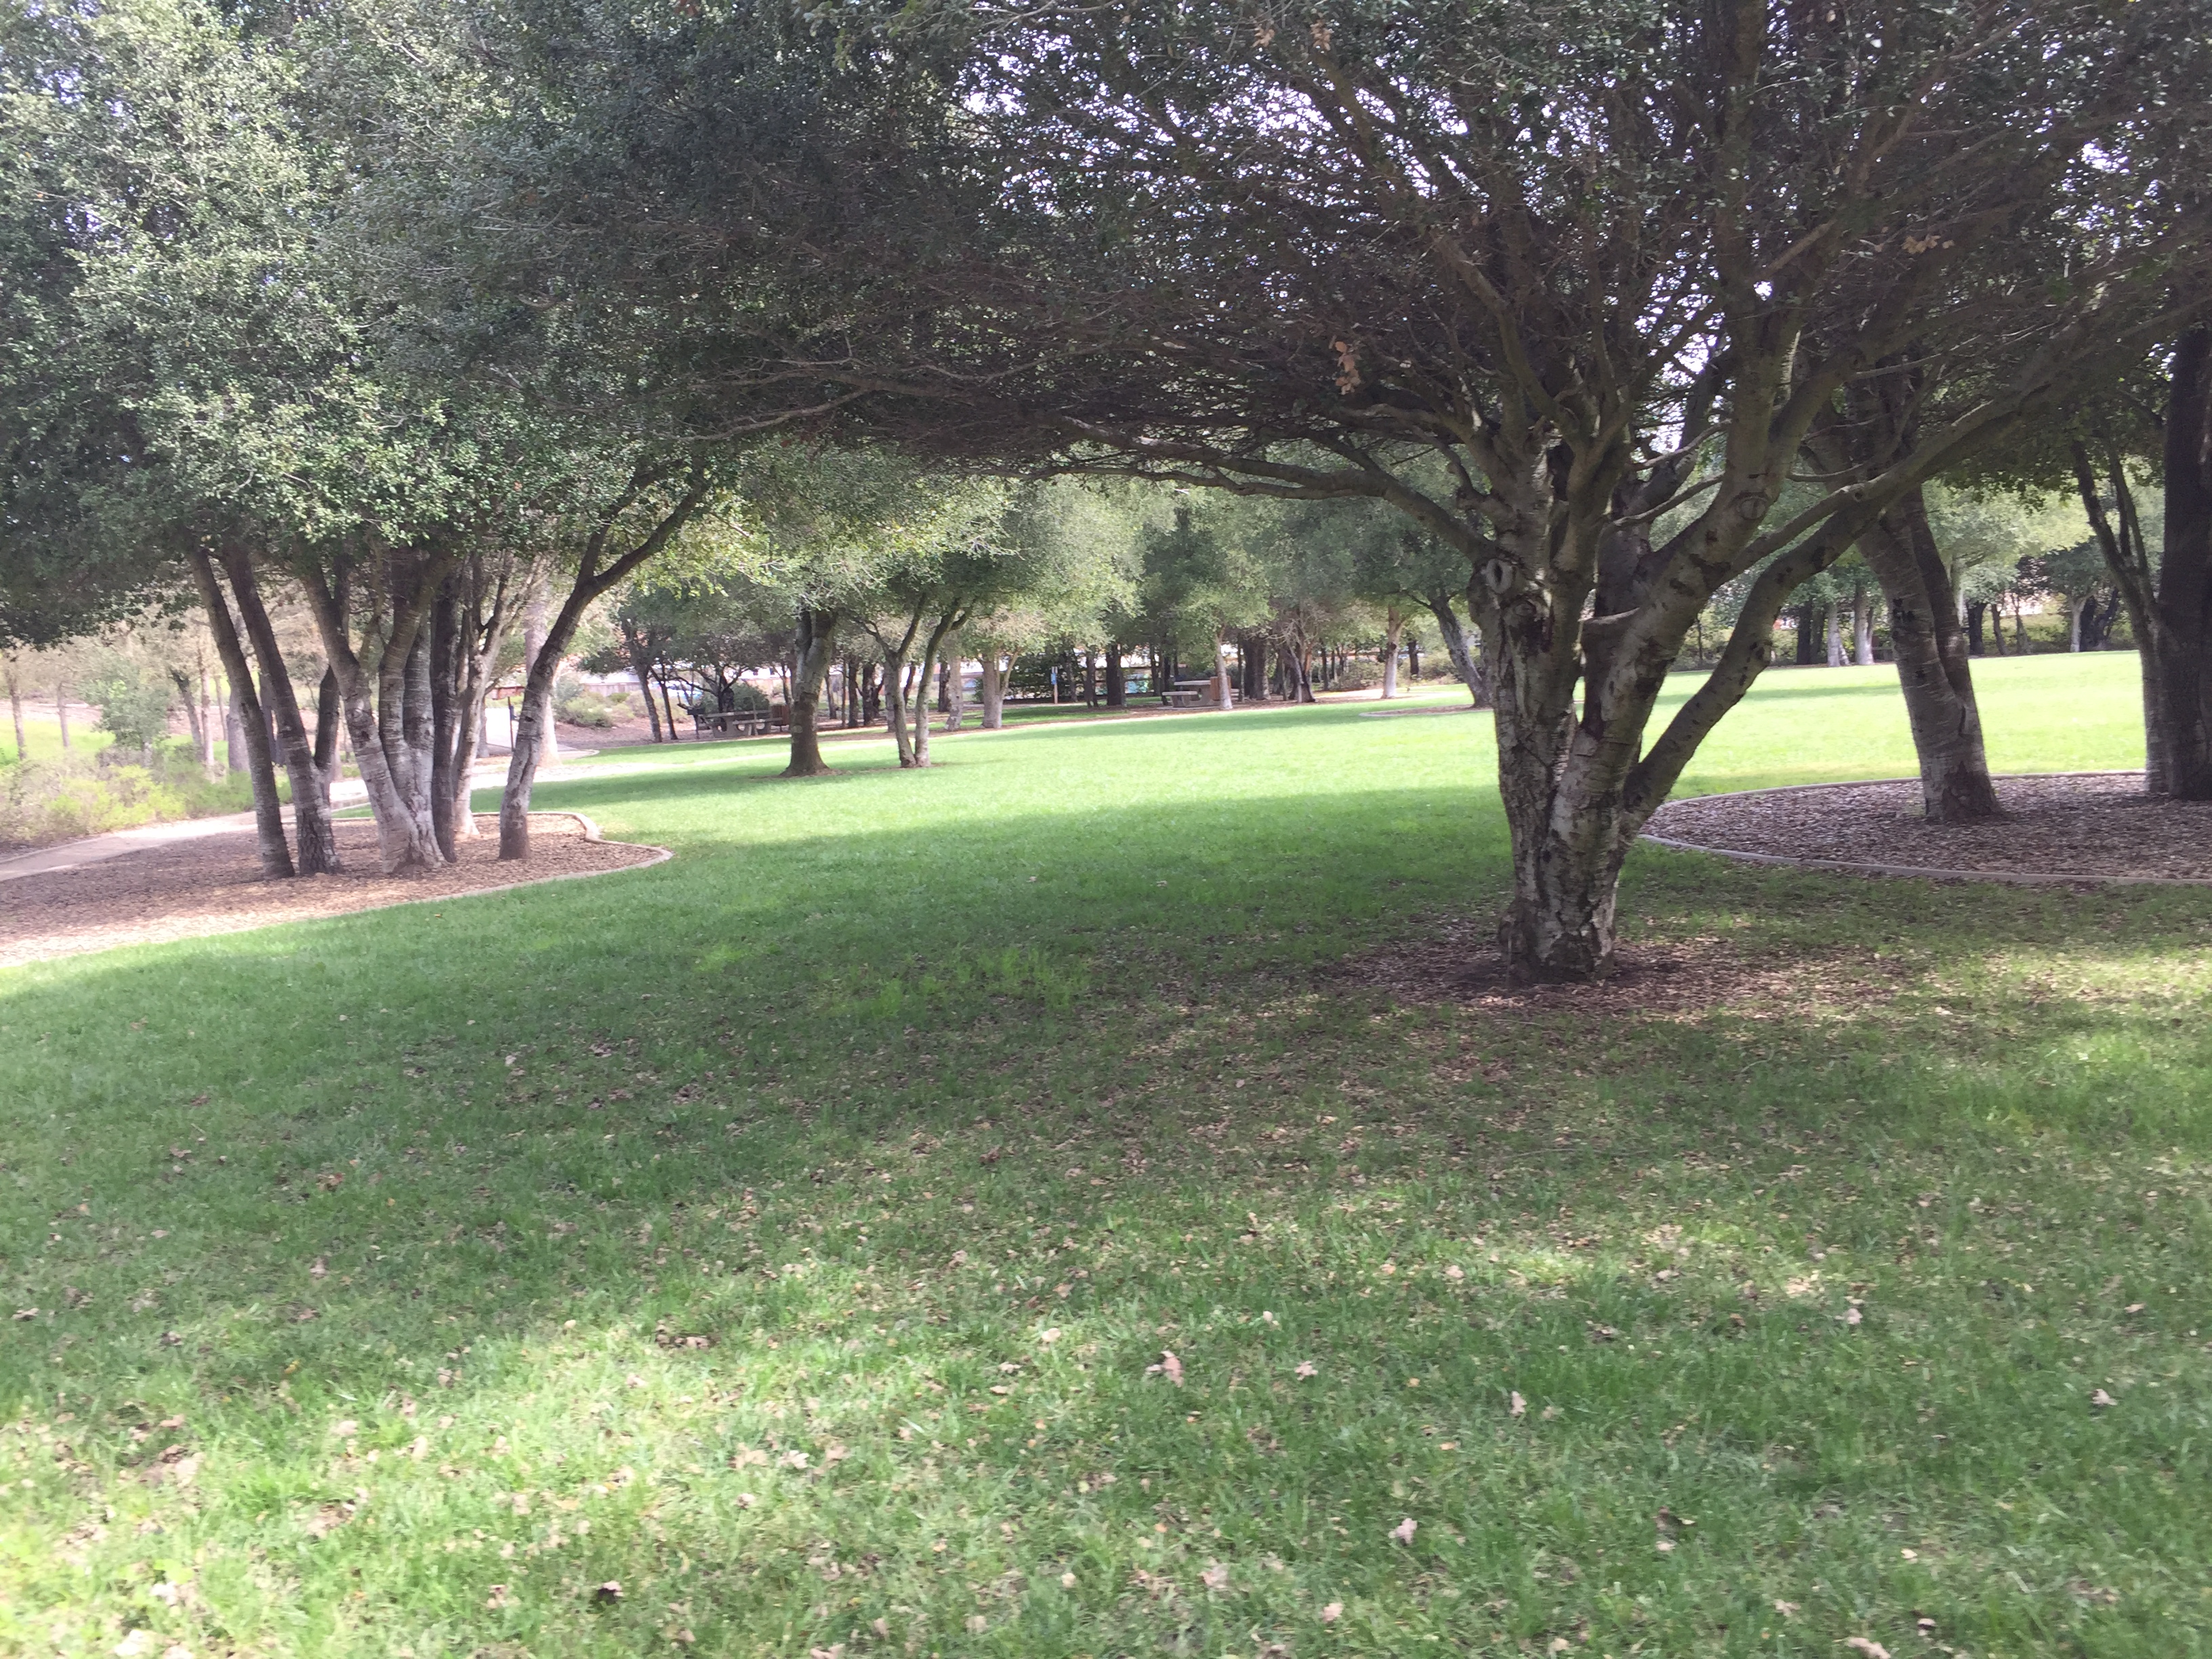 Large grassy area at Apple Valley Park in Atascadero California from the blog Two In Tow & On The Go.